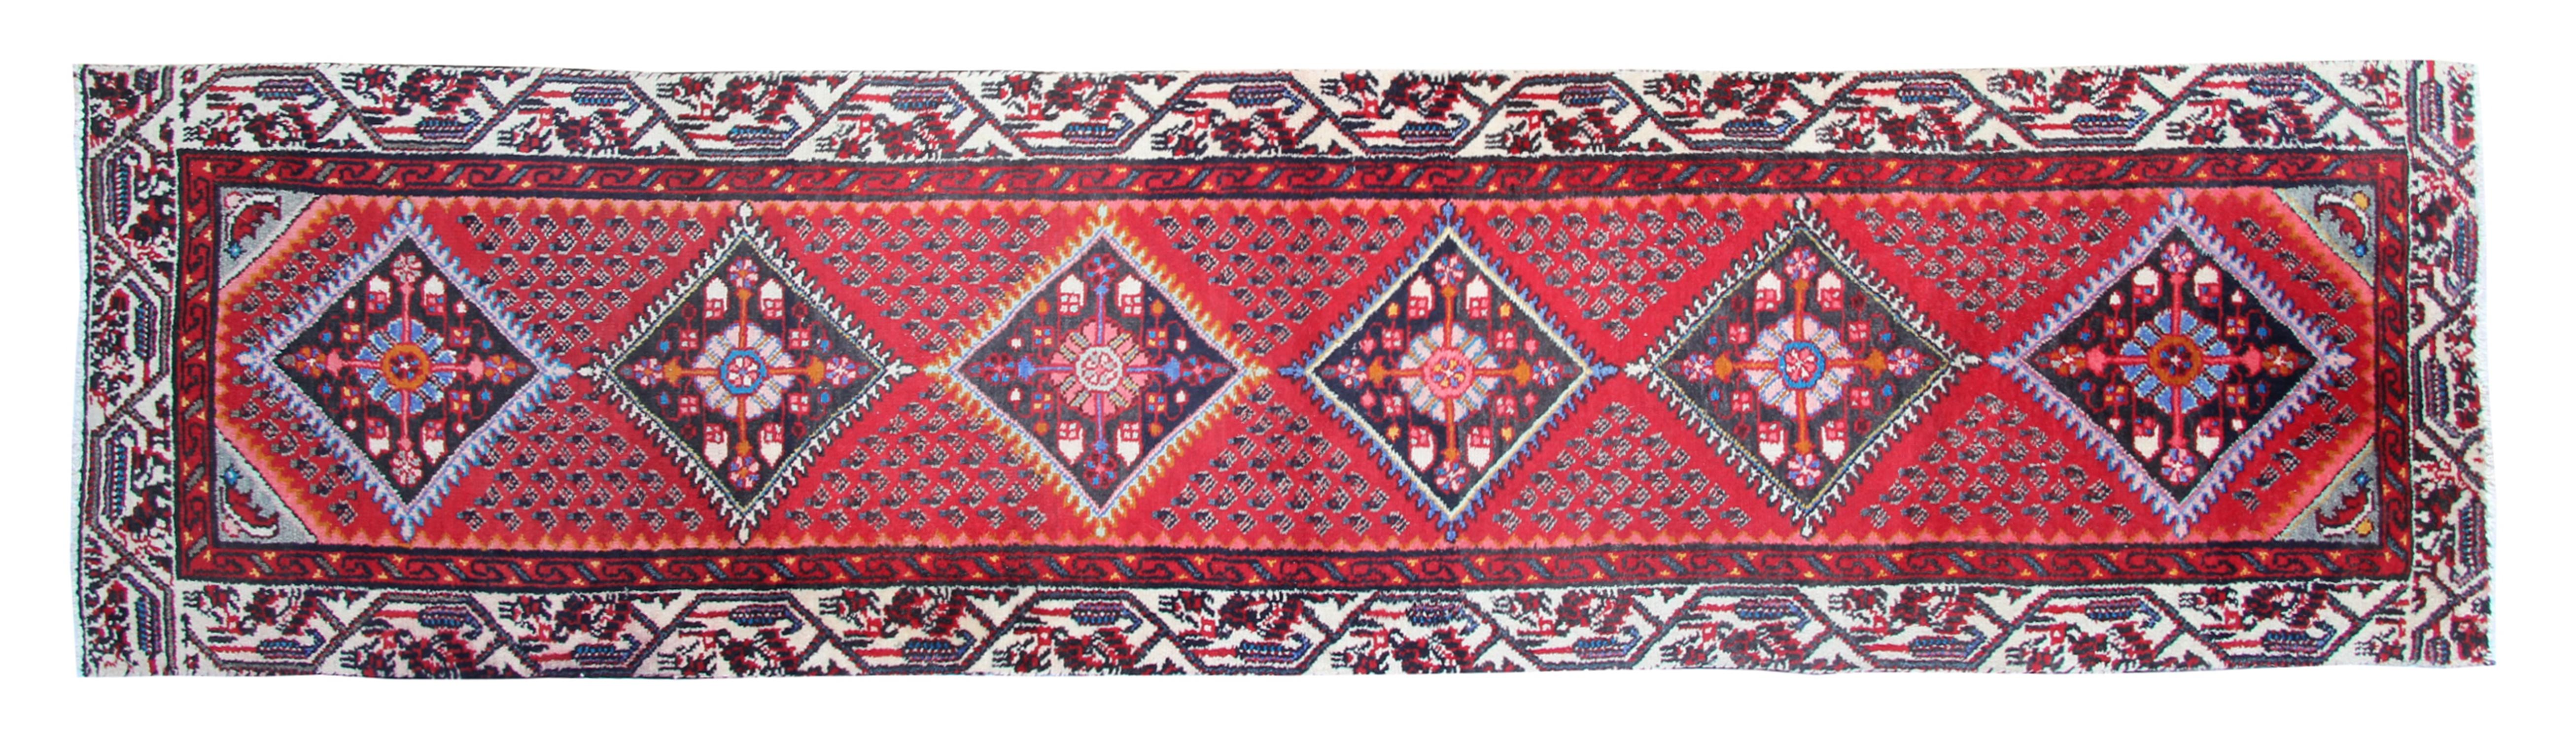 Hand-Knotted Handwoven Traditional Red Runner Rug, Long Vintage Tribal Wool Carpet For Sale